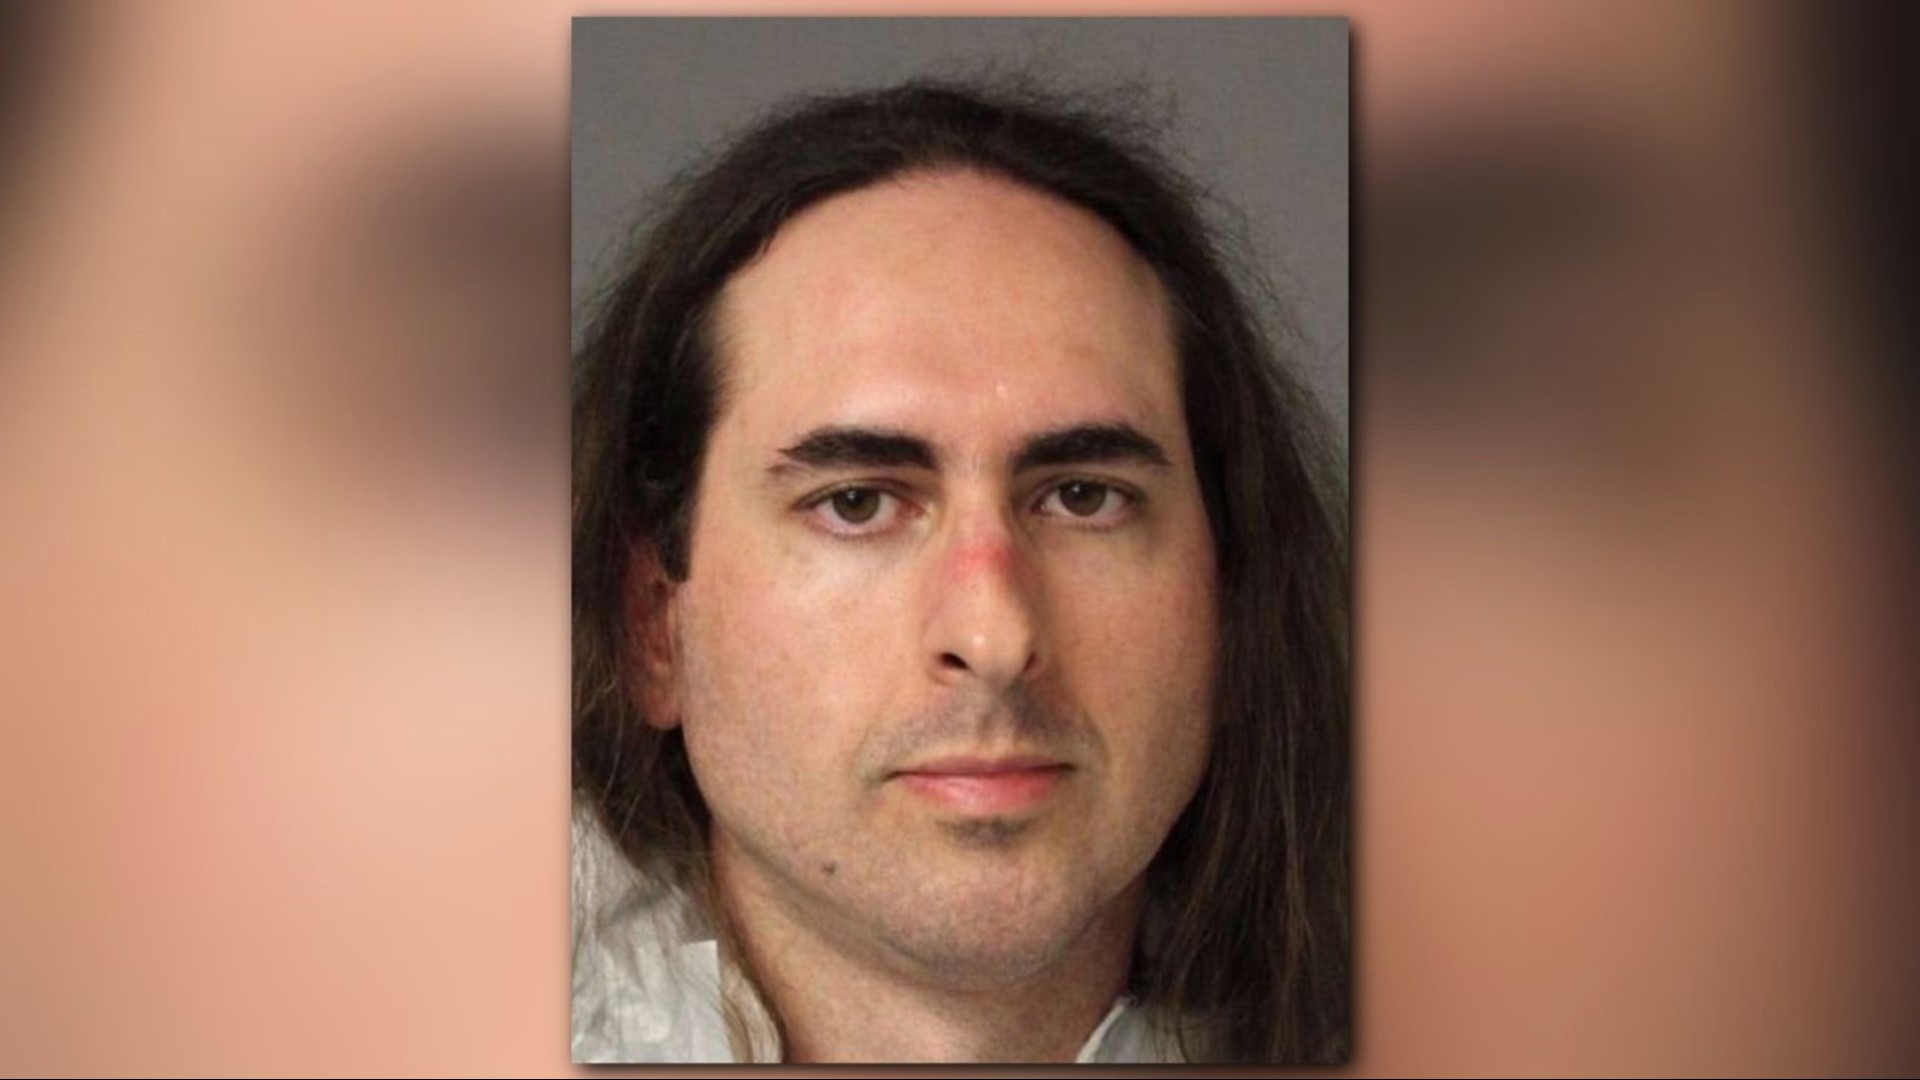 The trial of Jarrod Ramos, the suspected Capital Gazette shooter, will be held in two parts; one to determine if he is guilty or innocent, then a second to determine if his mental state made him not criminally responsible.